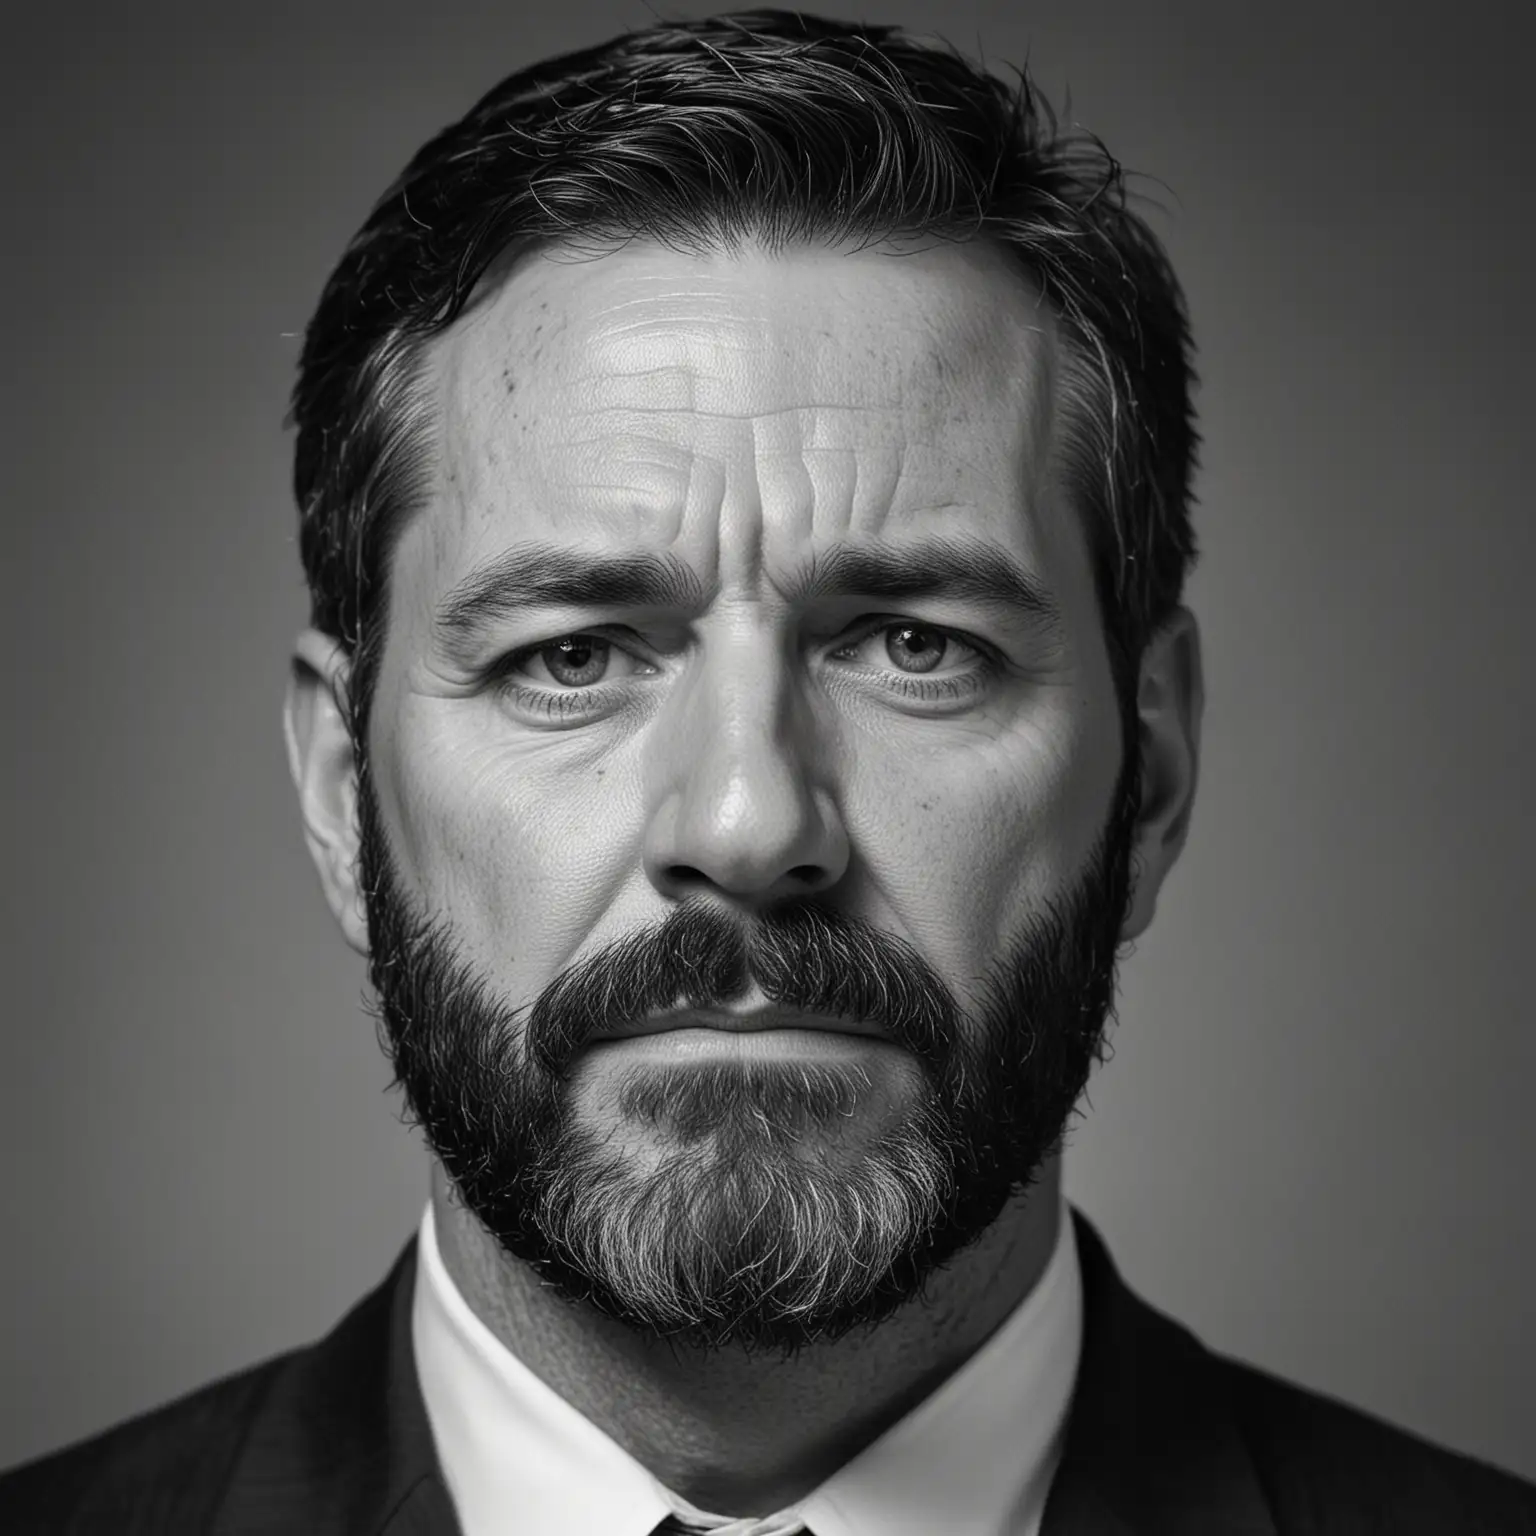 Federal Agent with Intense Stare in Grayscale Portrait